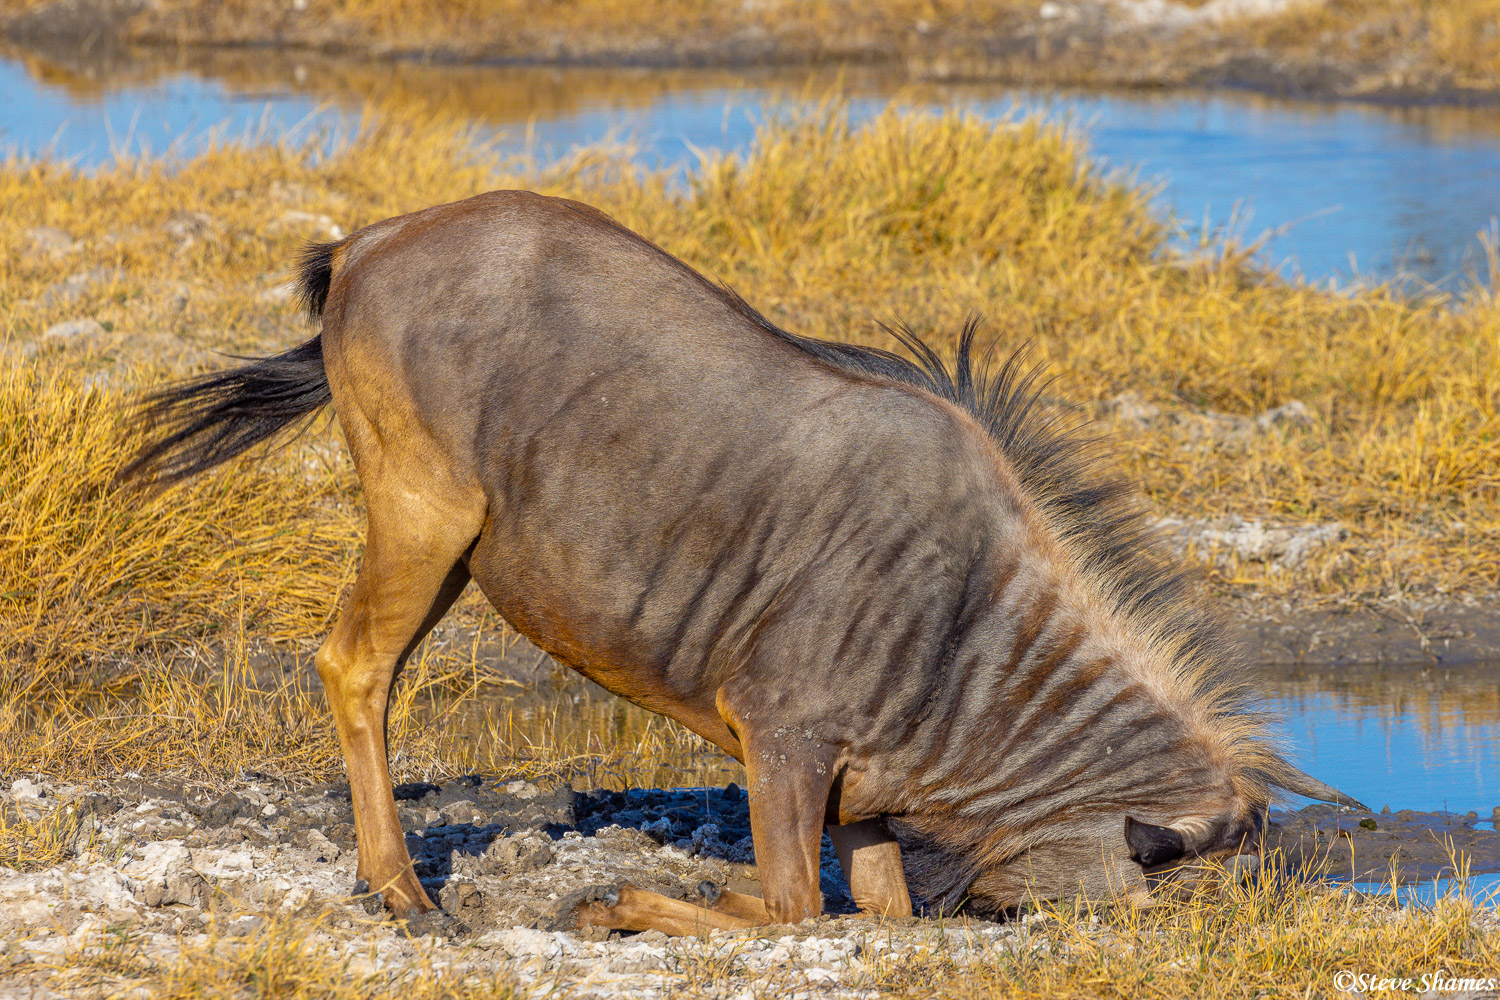 This wildebeest likes the mud so much that he just gets down and rubs his face in it.